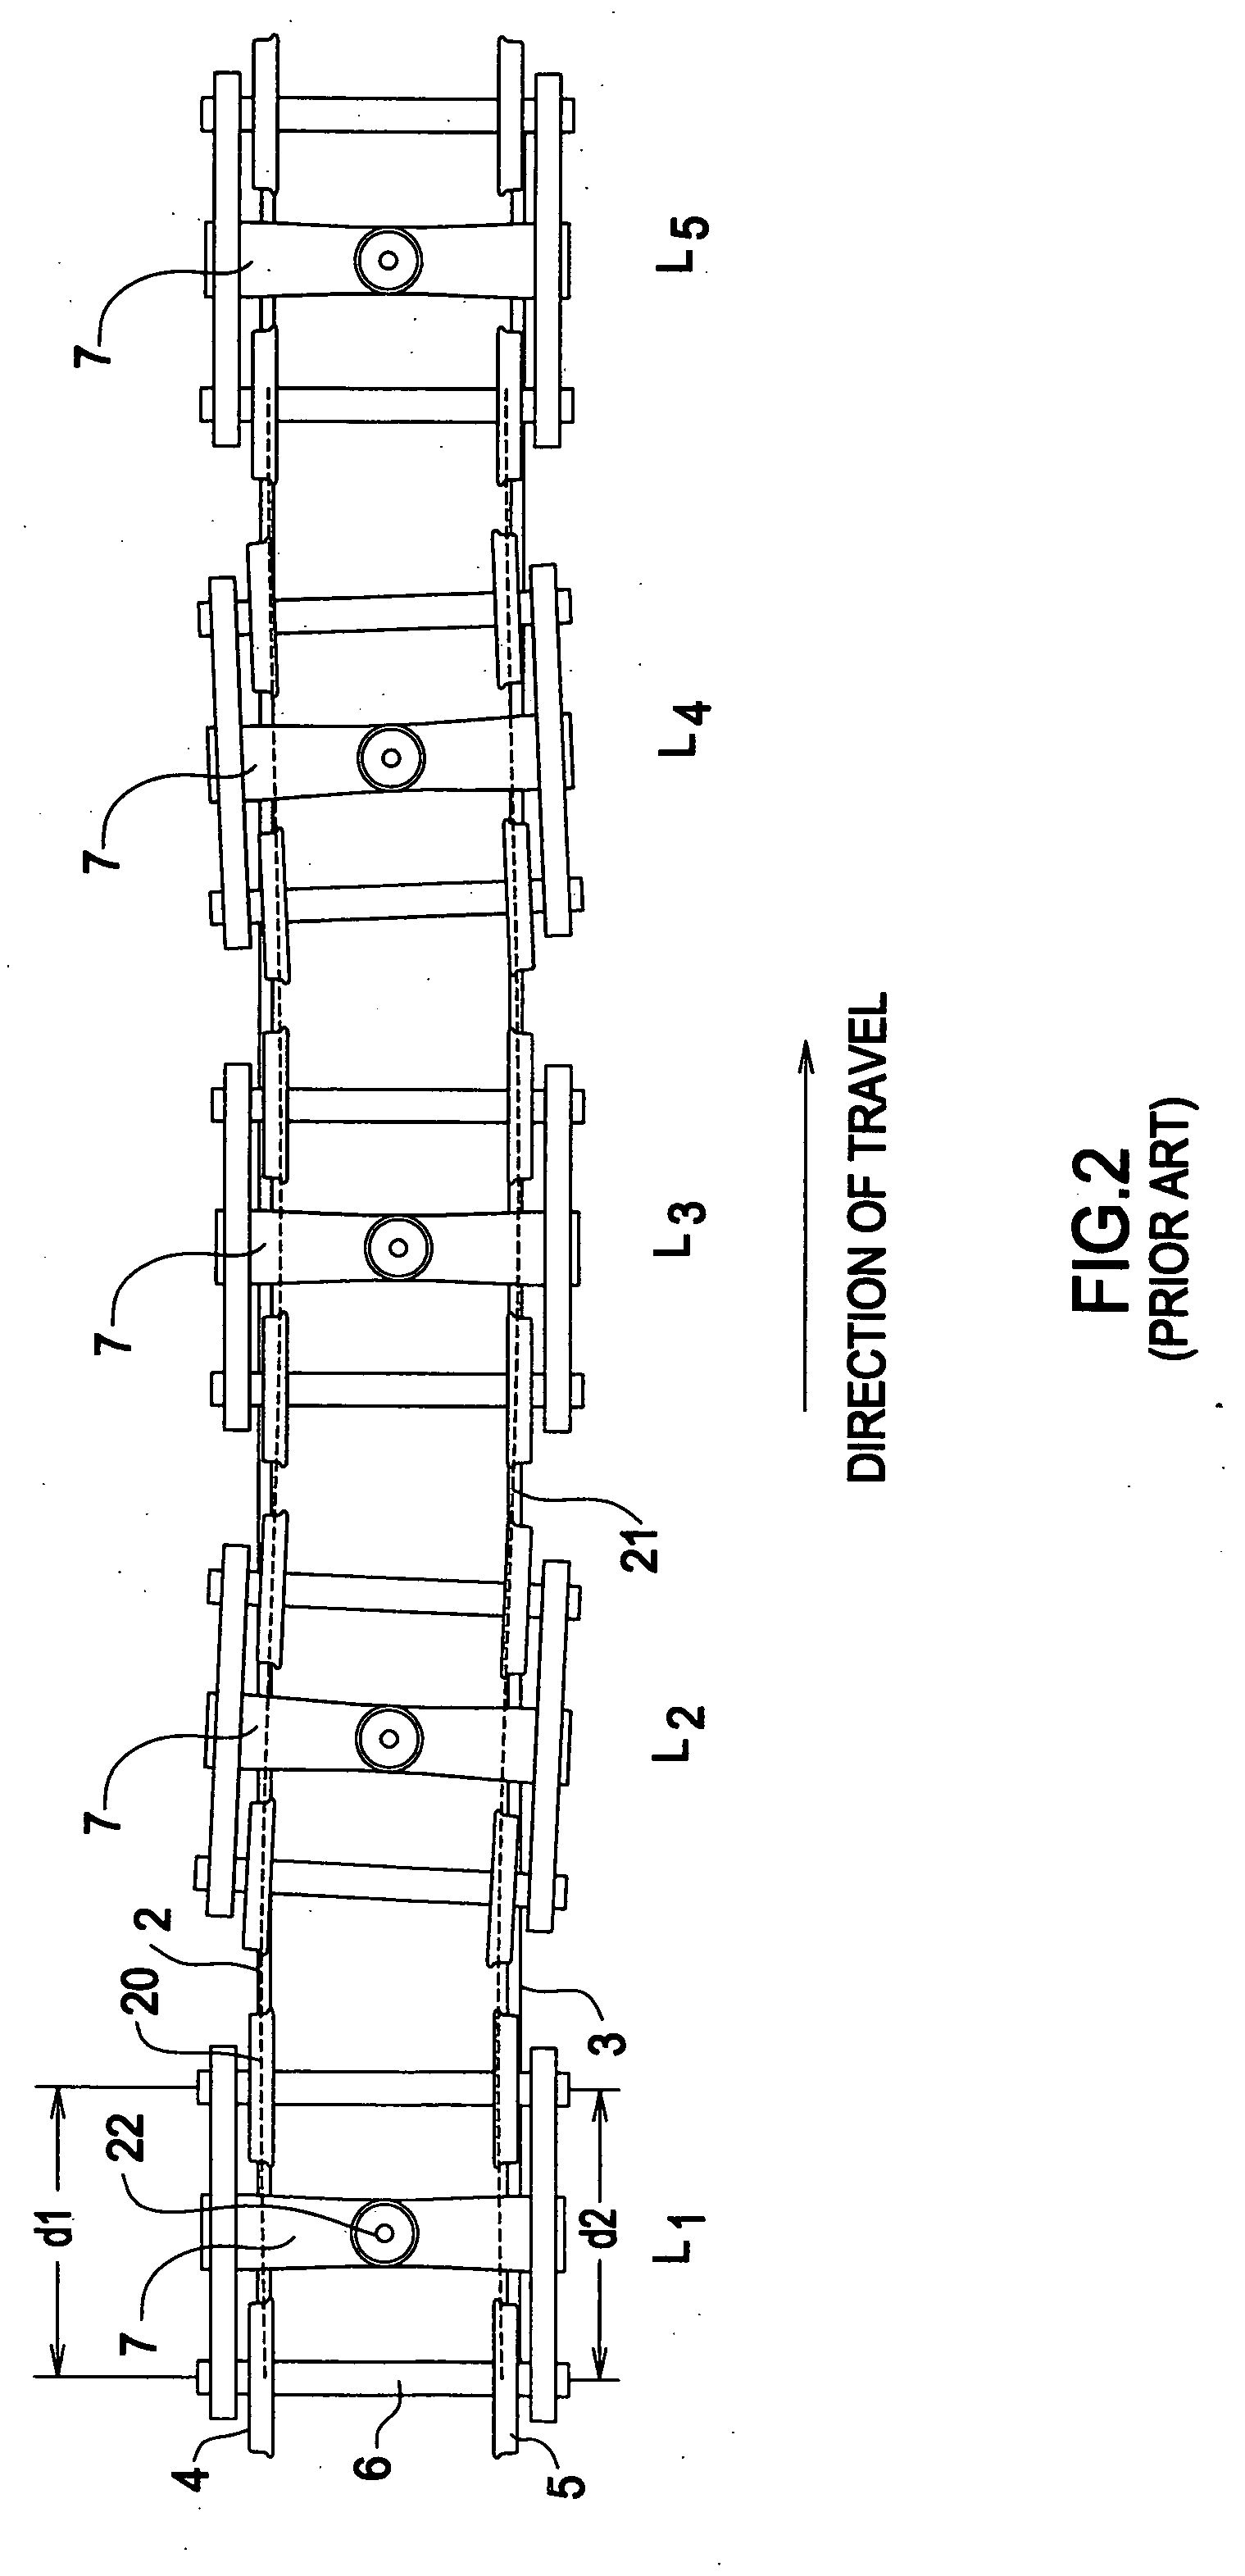 Railroad car lateral instability and tracking error detector